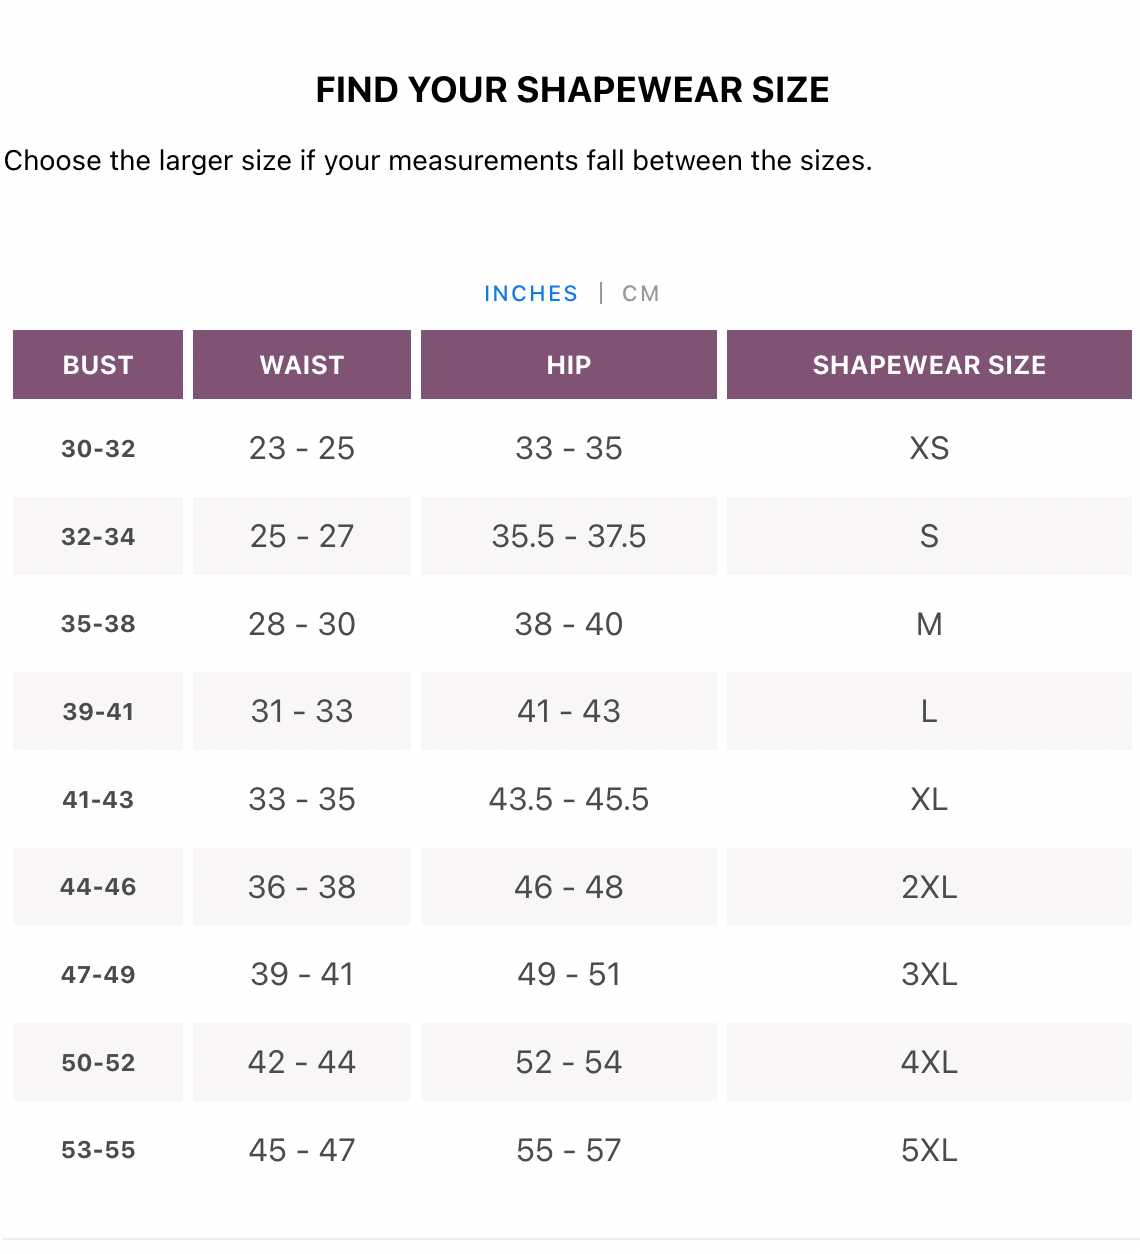 Curveez Incredibly Shaping Cami –